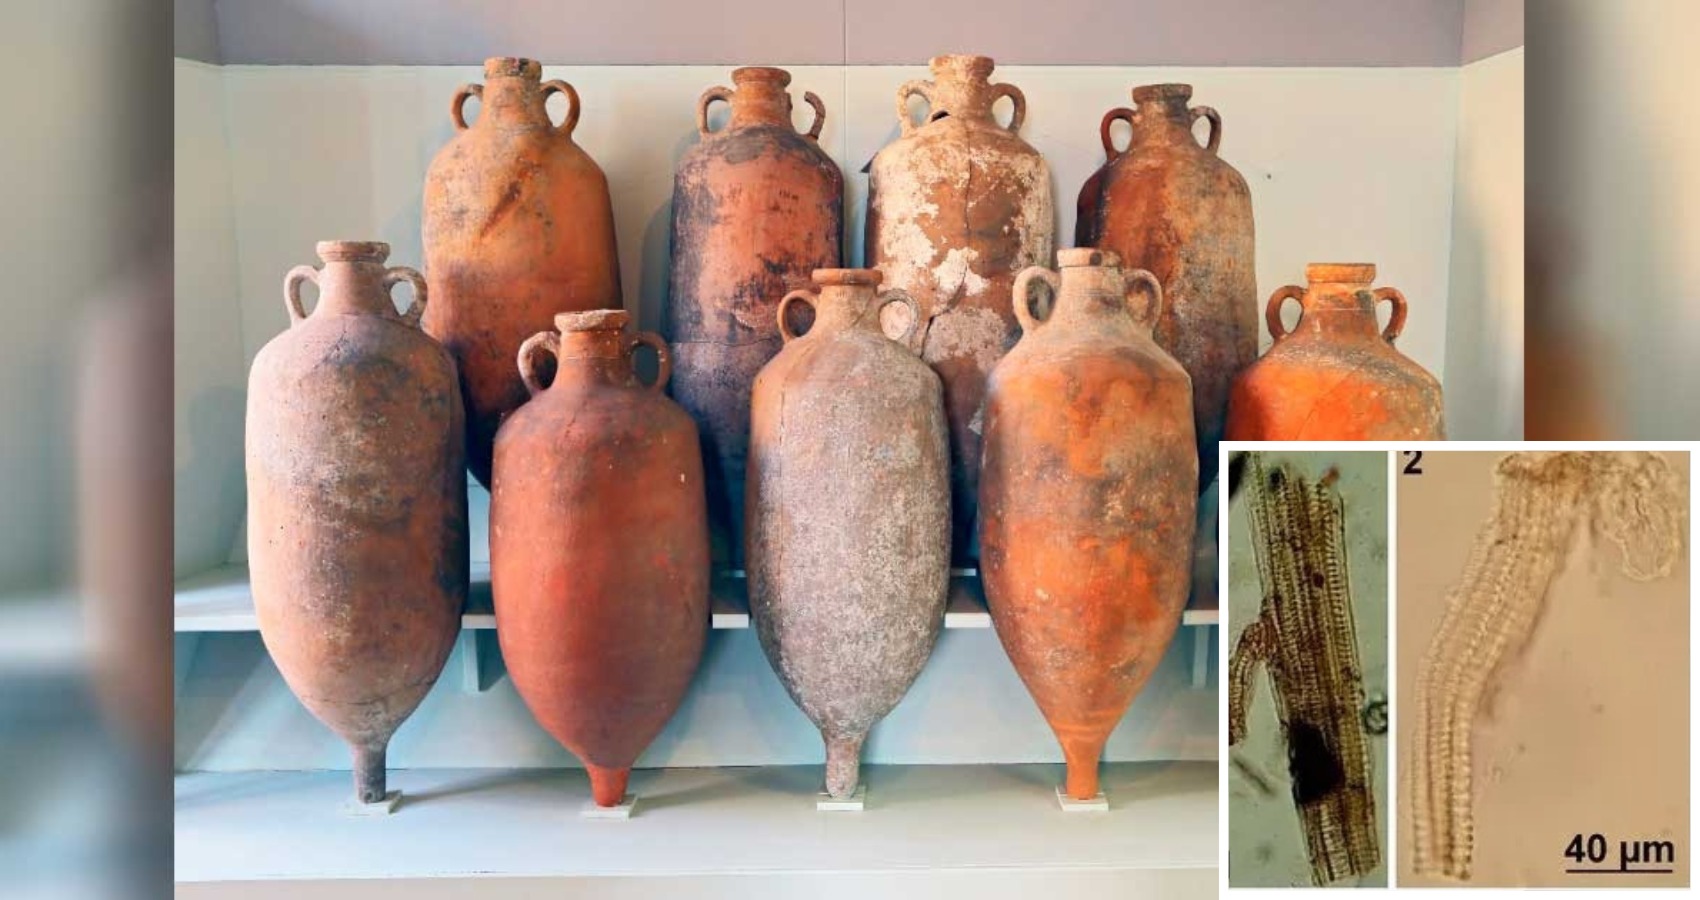 1,500-Year-Old Wine Jars Reveal Secrets Of Roman Art Of Winemaking, Study Finds